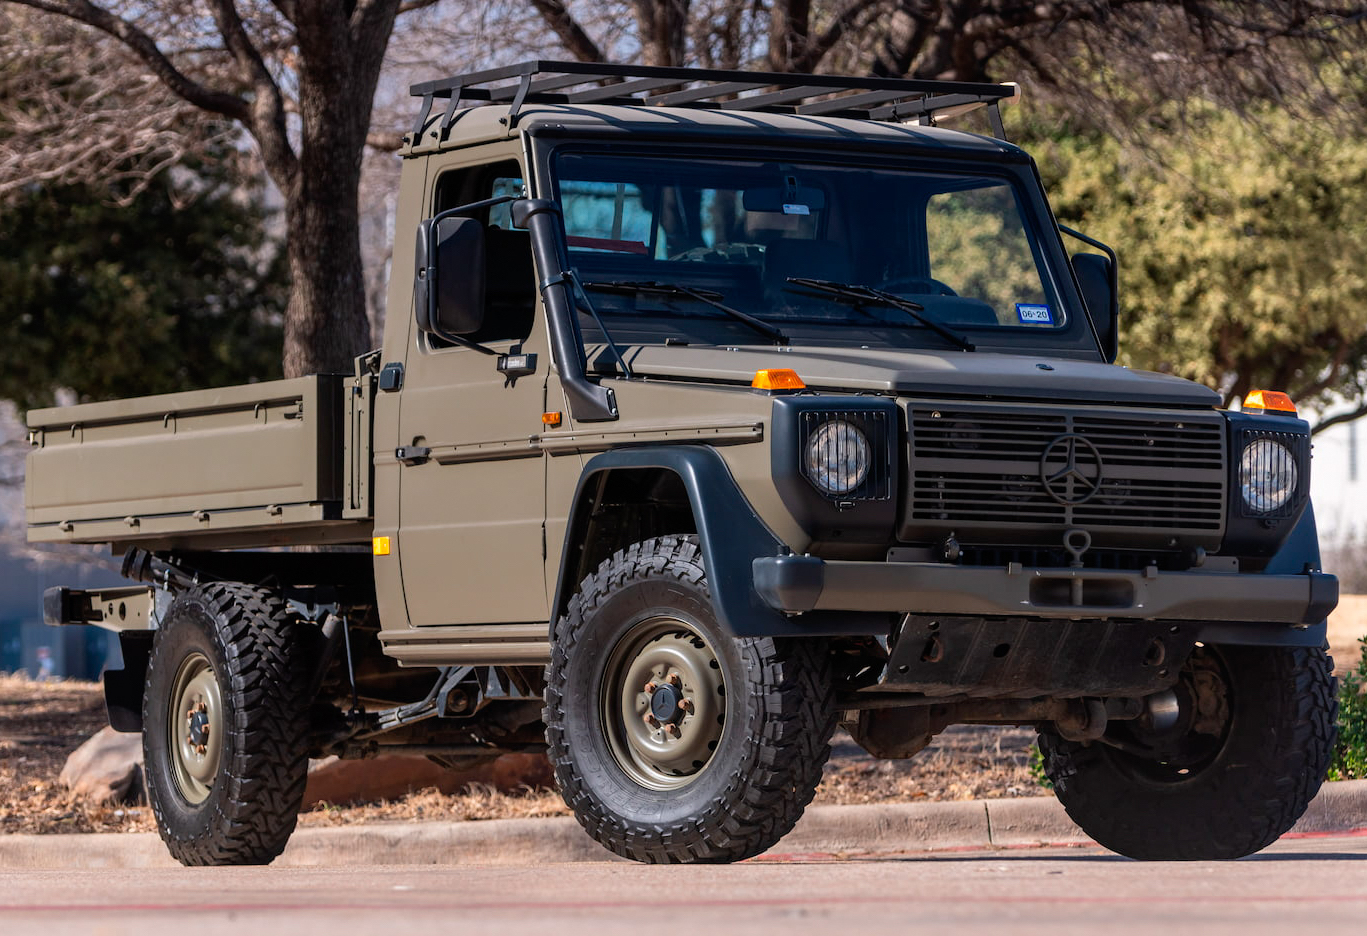 1 of 9 Imported To The USA: A Rare Mercedes-Benz G Wagon Pickup